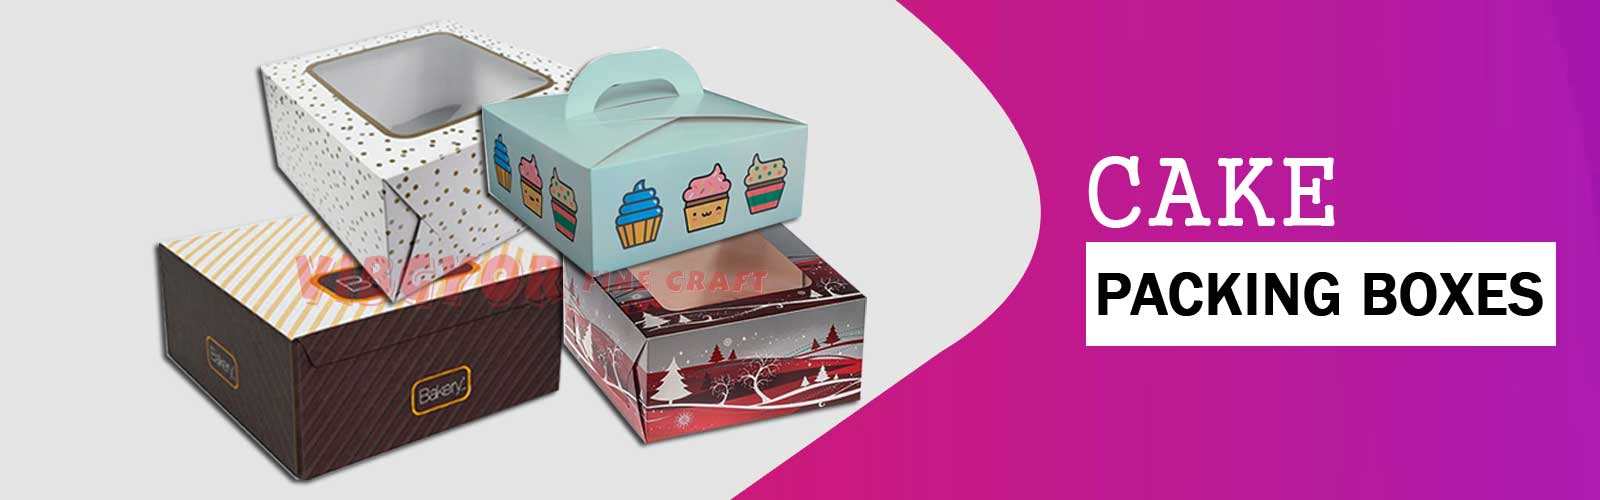 Buy BBC INS Marble Cake Box with Clear Lid Gift Packaging Boxes for Moon  CakeCookieCandySoap 63Lx35W x2H 10 Sets 2 Cavity Online at  Low Prices in India  Amazonin